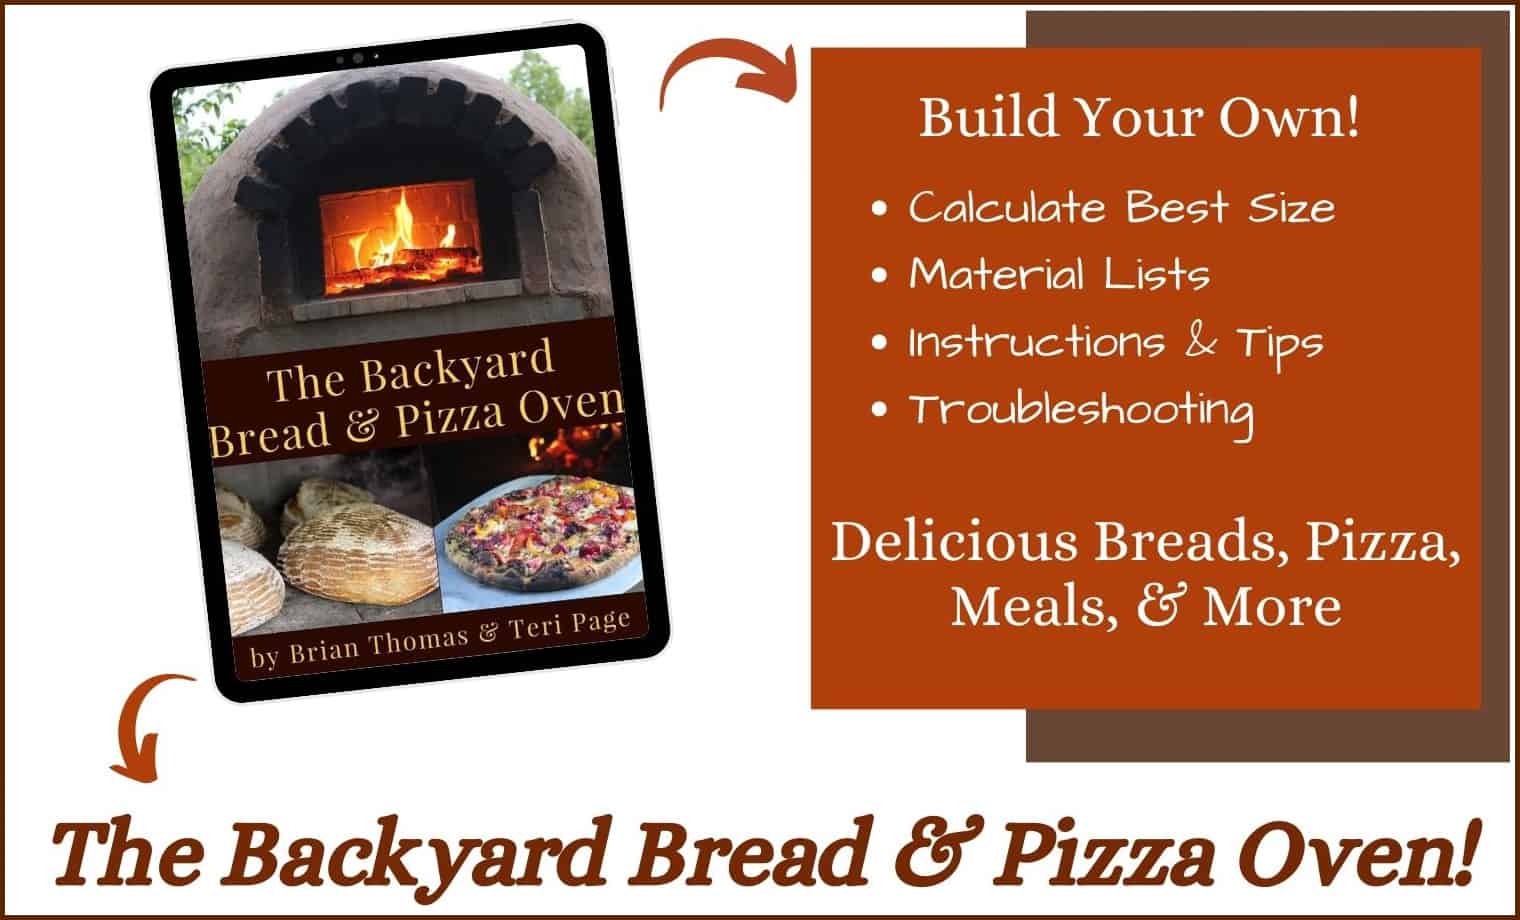 The Backyard Bread & Pizza Oven, a step by step guide to building your own outdoor wood-fired pizza 